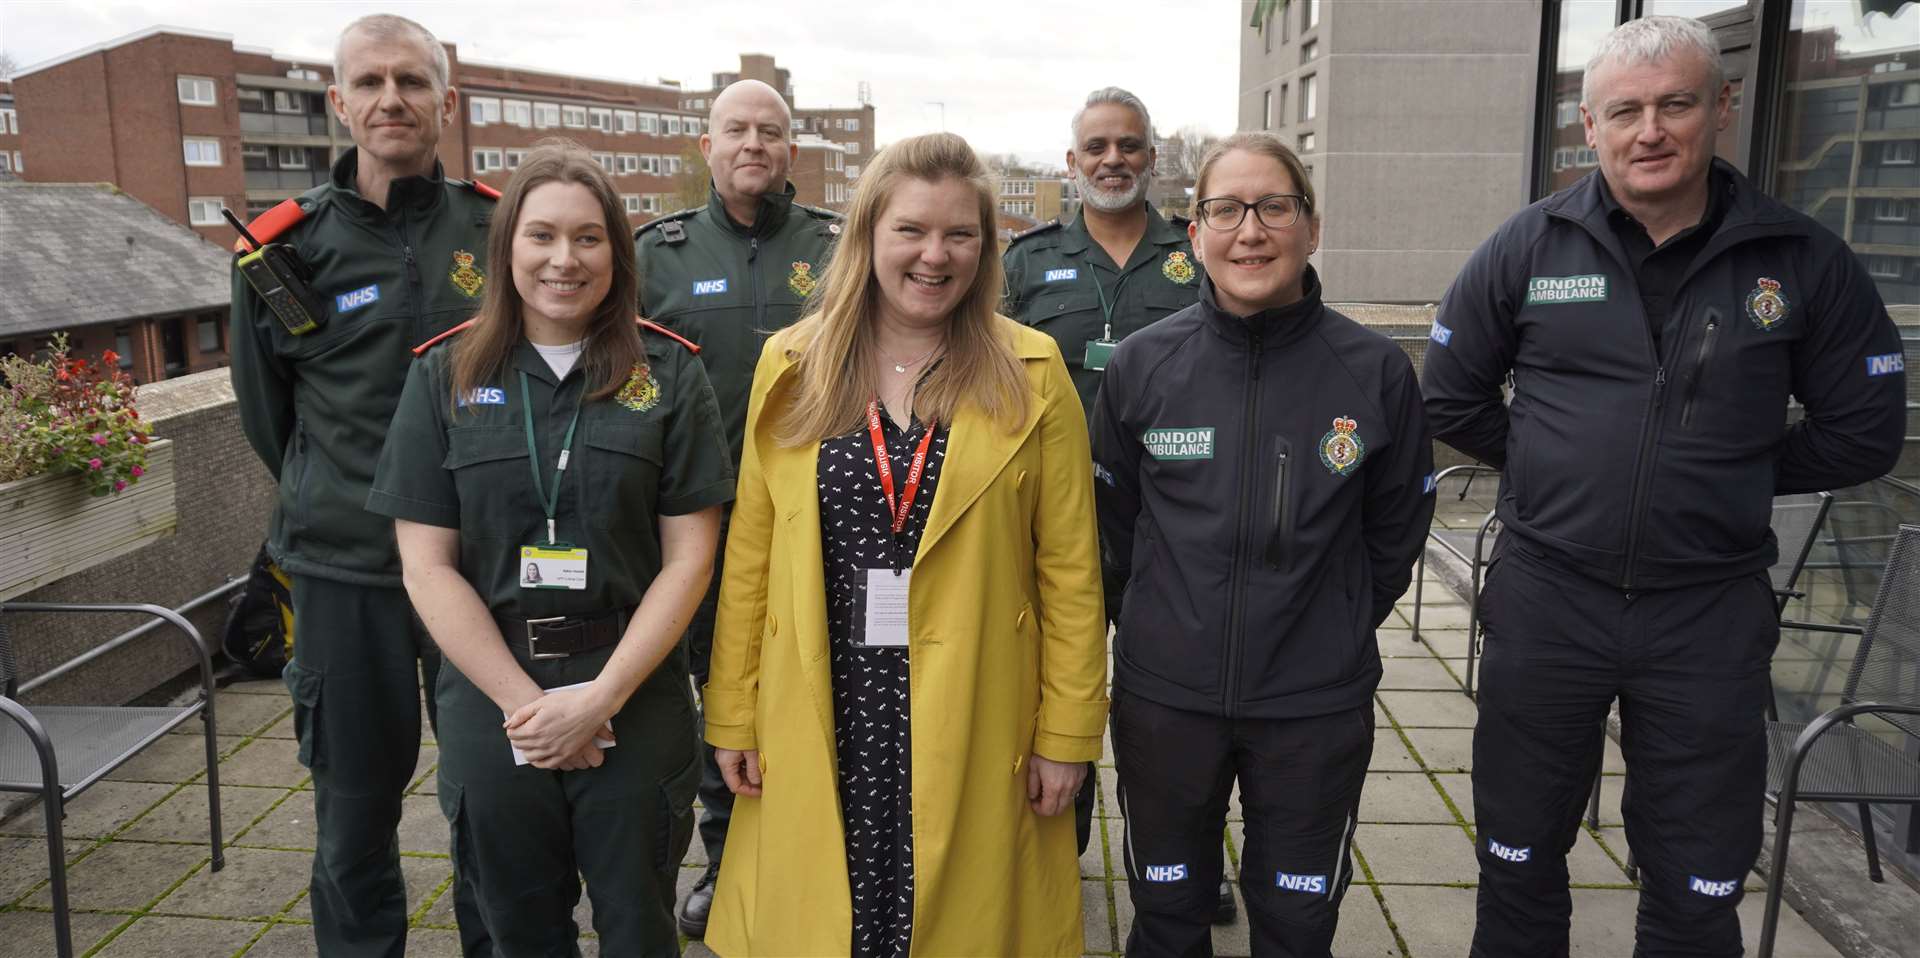 Kate met with the London Ambulance Service staff who saved her life